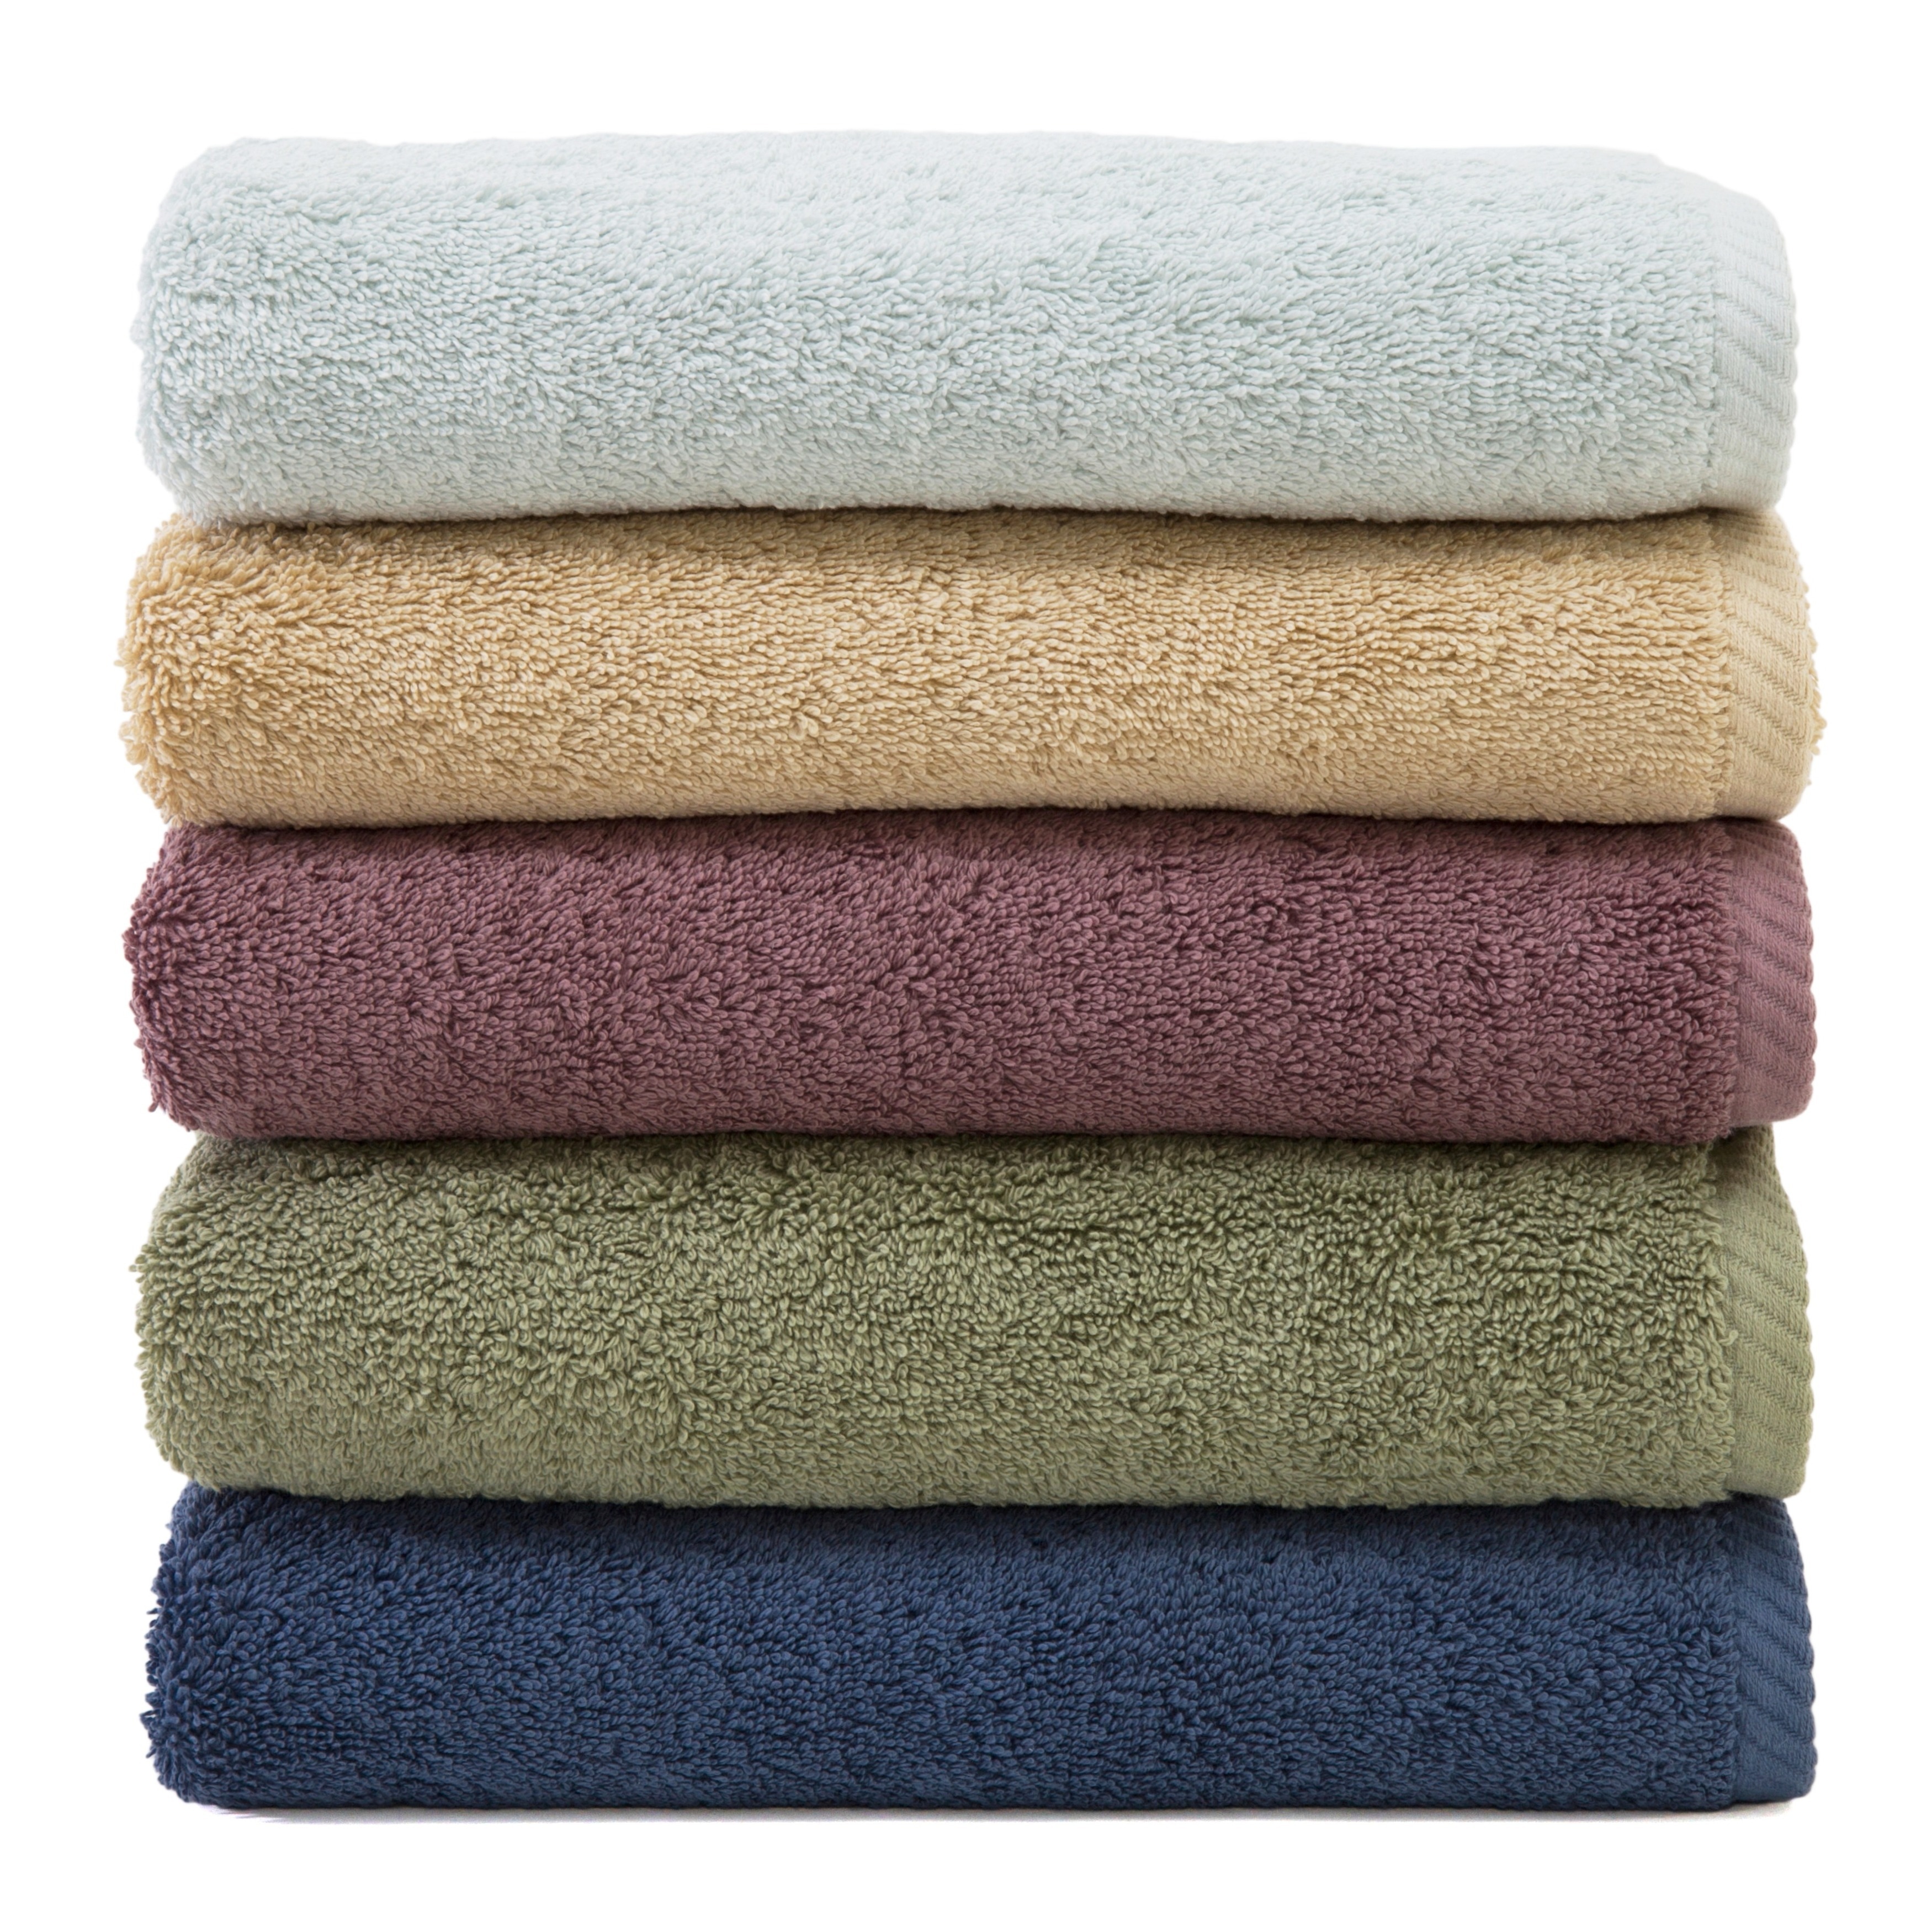 Authentic Hotel and Spa Turkish Cotton Bath Towels (Set of 4